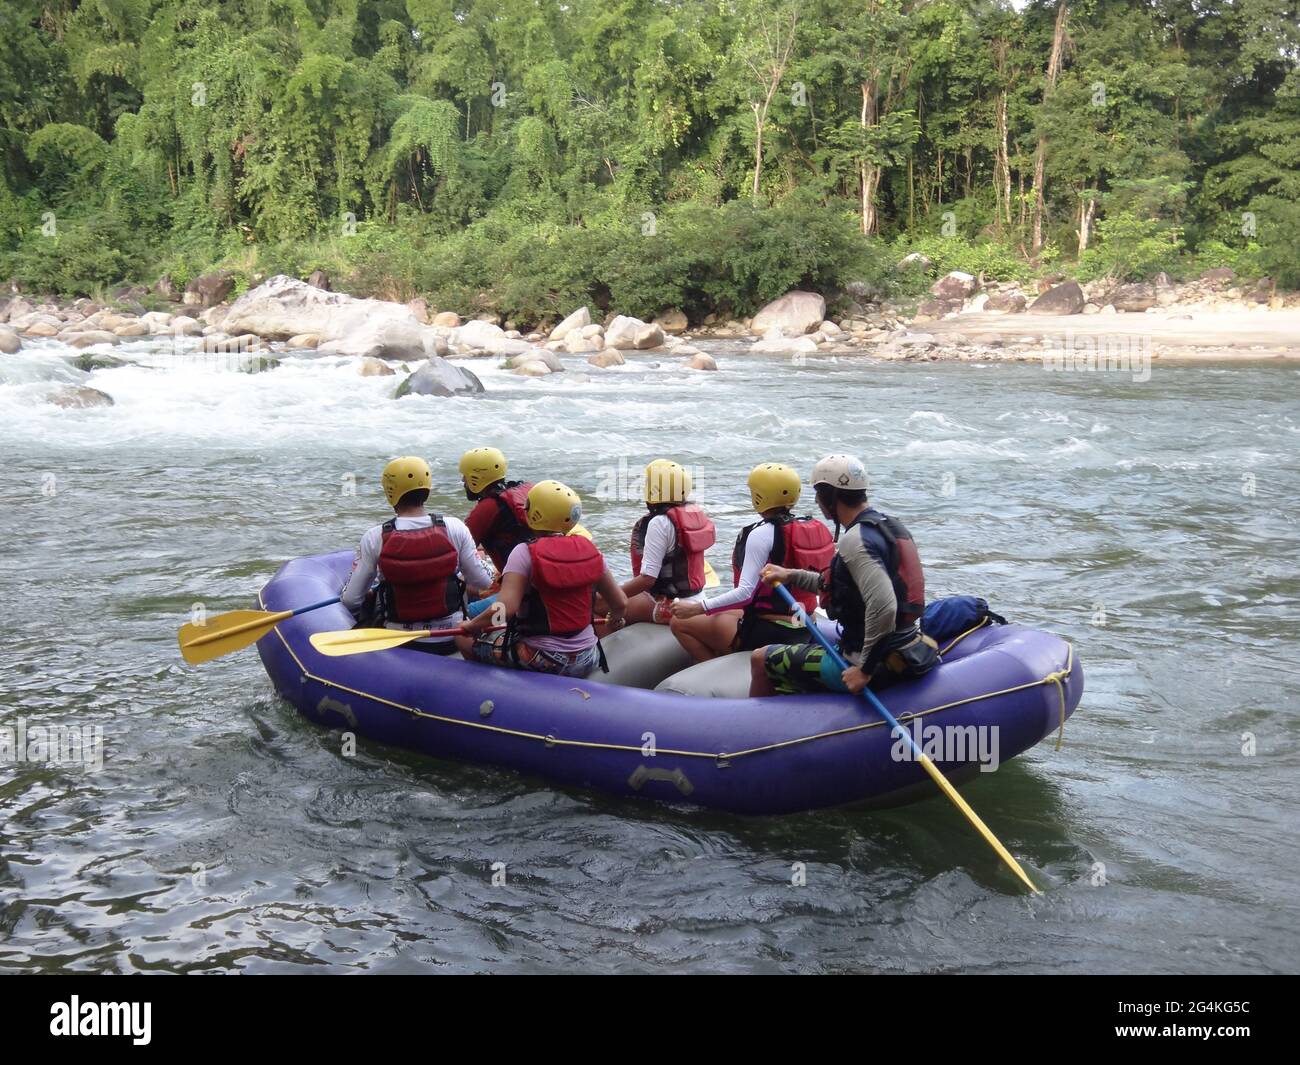 BARINAS, VENEZUELA - Apr 18, 2021: enjoy a rafting and padle surf in an unforgettable adventure on a mighty river Stock Photo